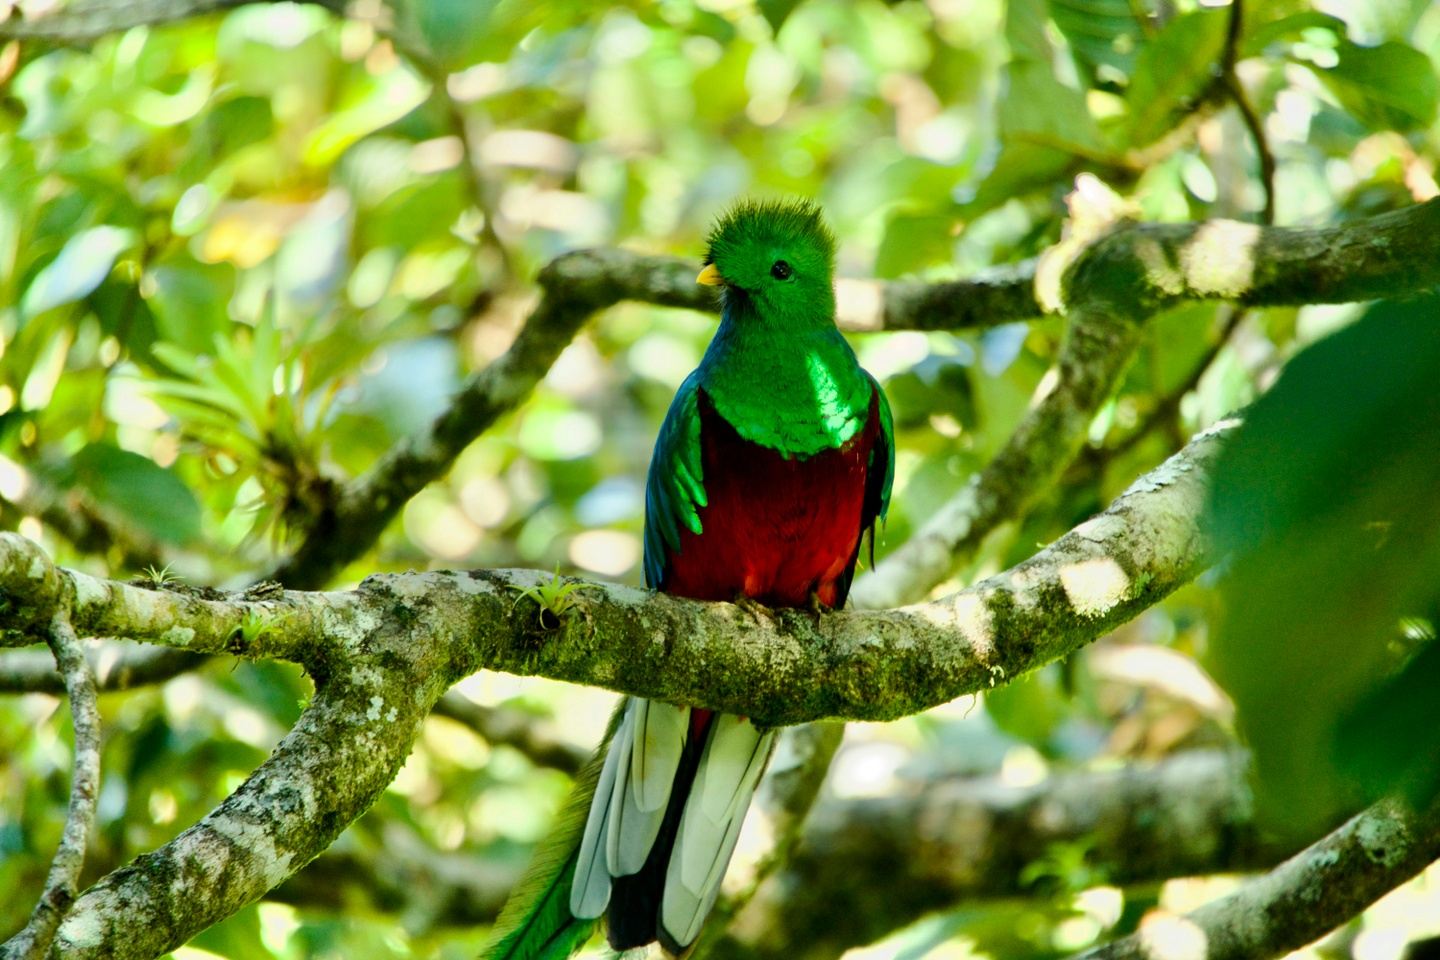 Costa Rica: Culture of Conservation